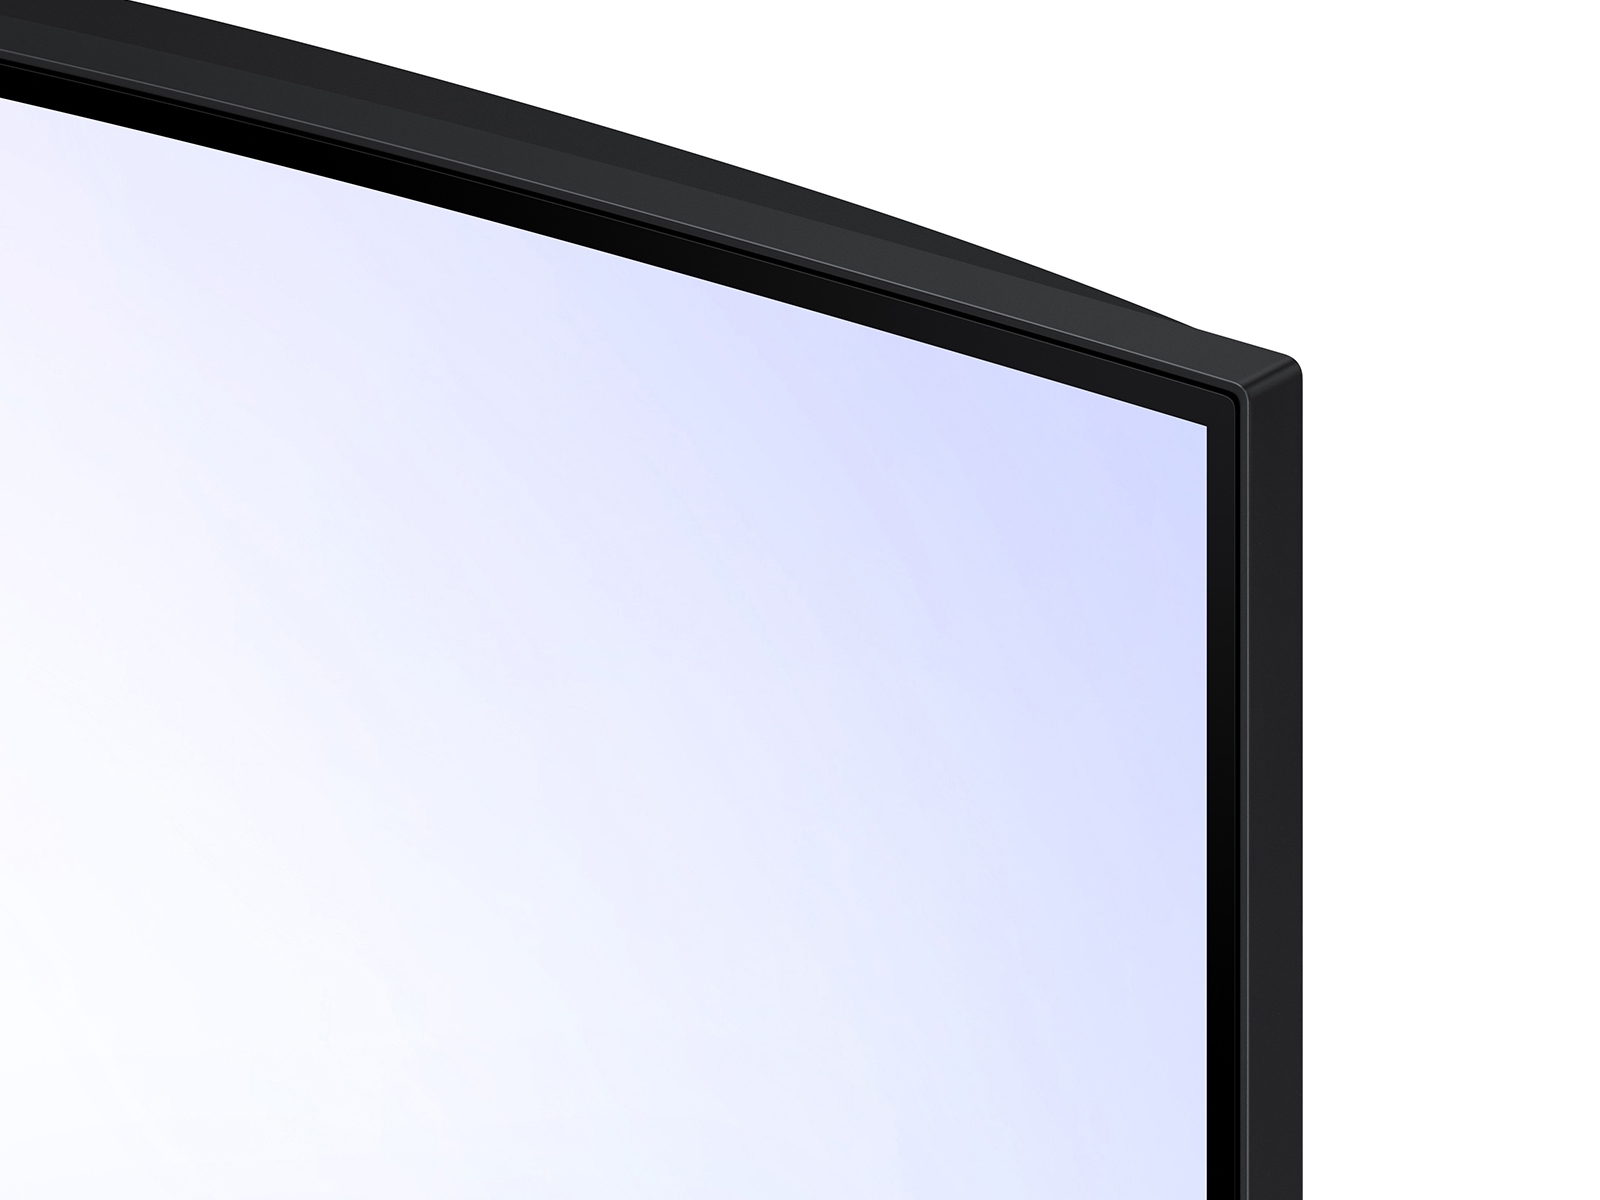 34 Curved UltraWide™ QHD IPS HDR 10 Built-in KVM Monitor with USB Type-C™